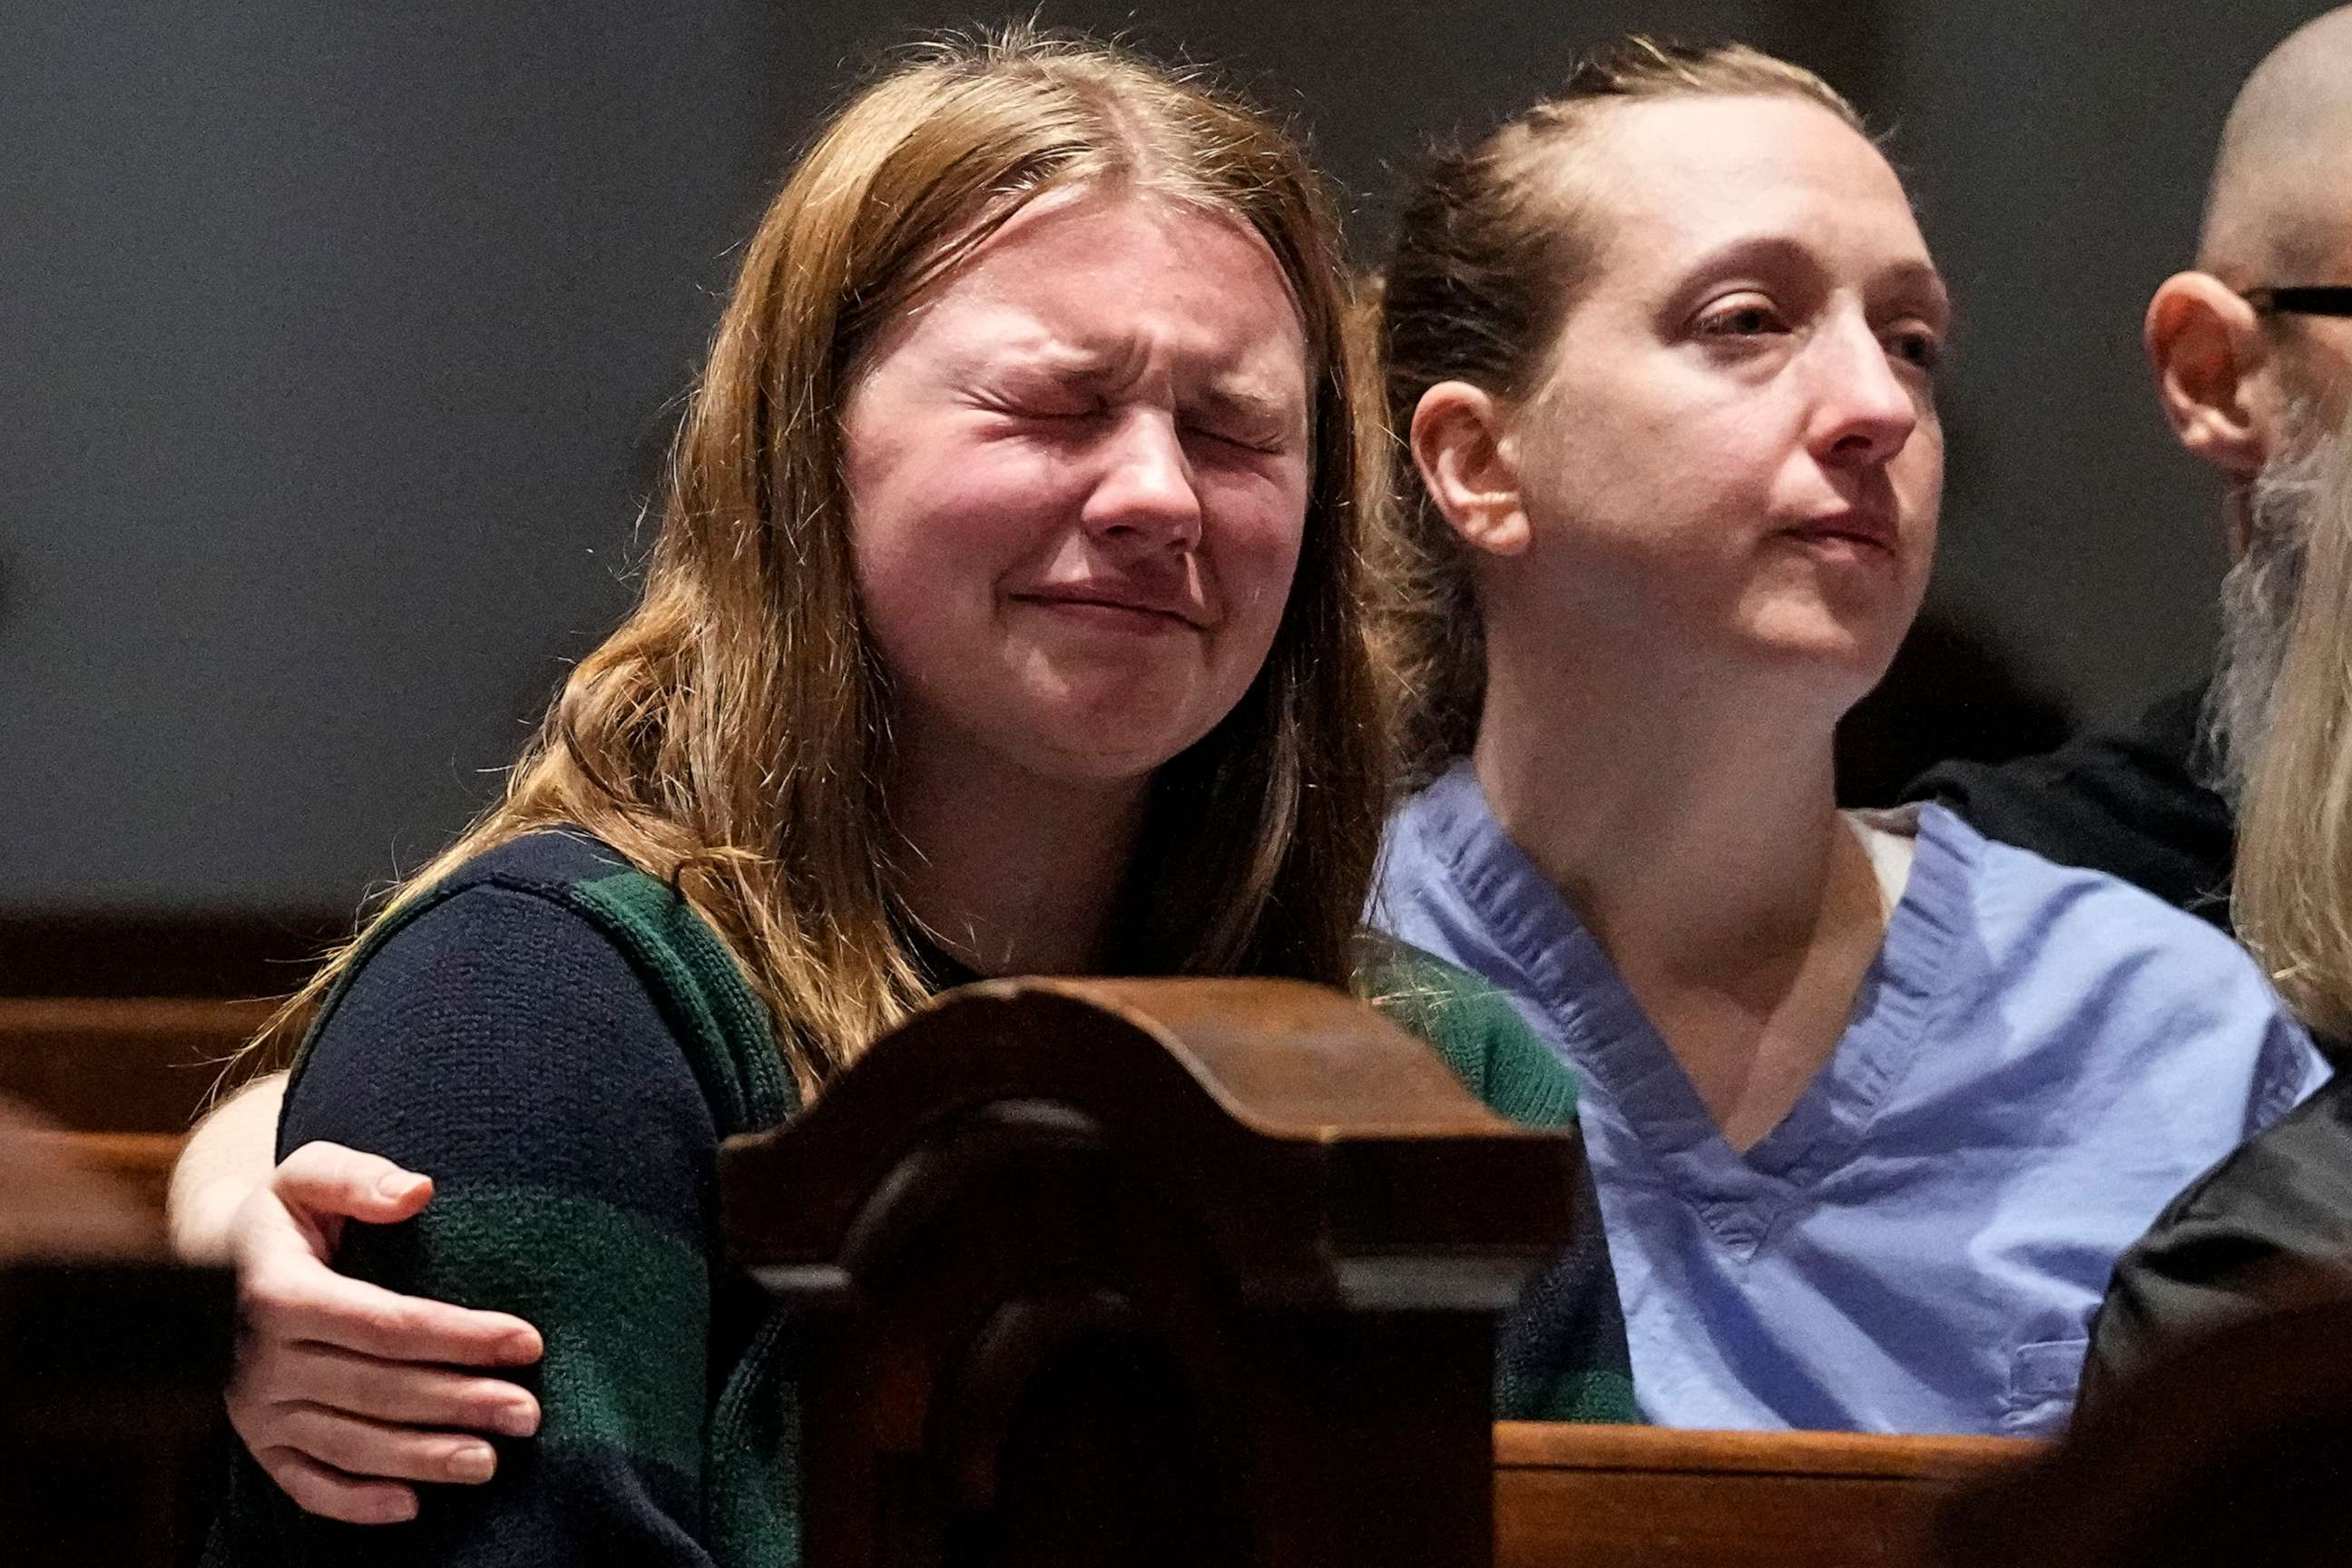 PHOTO: Parishioners participate in a community vigil at Belmont United Methodist Church in the aftermath of a school shooting in Nashville, March 27, 2023, in Nashville, Tenn.